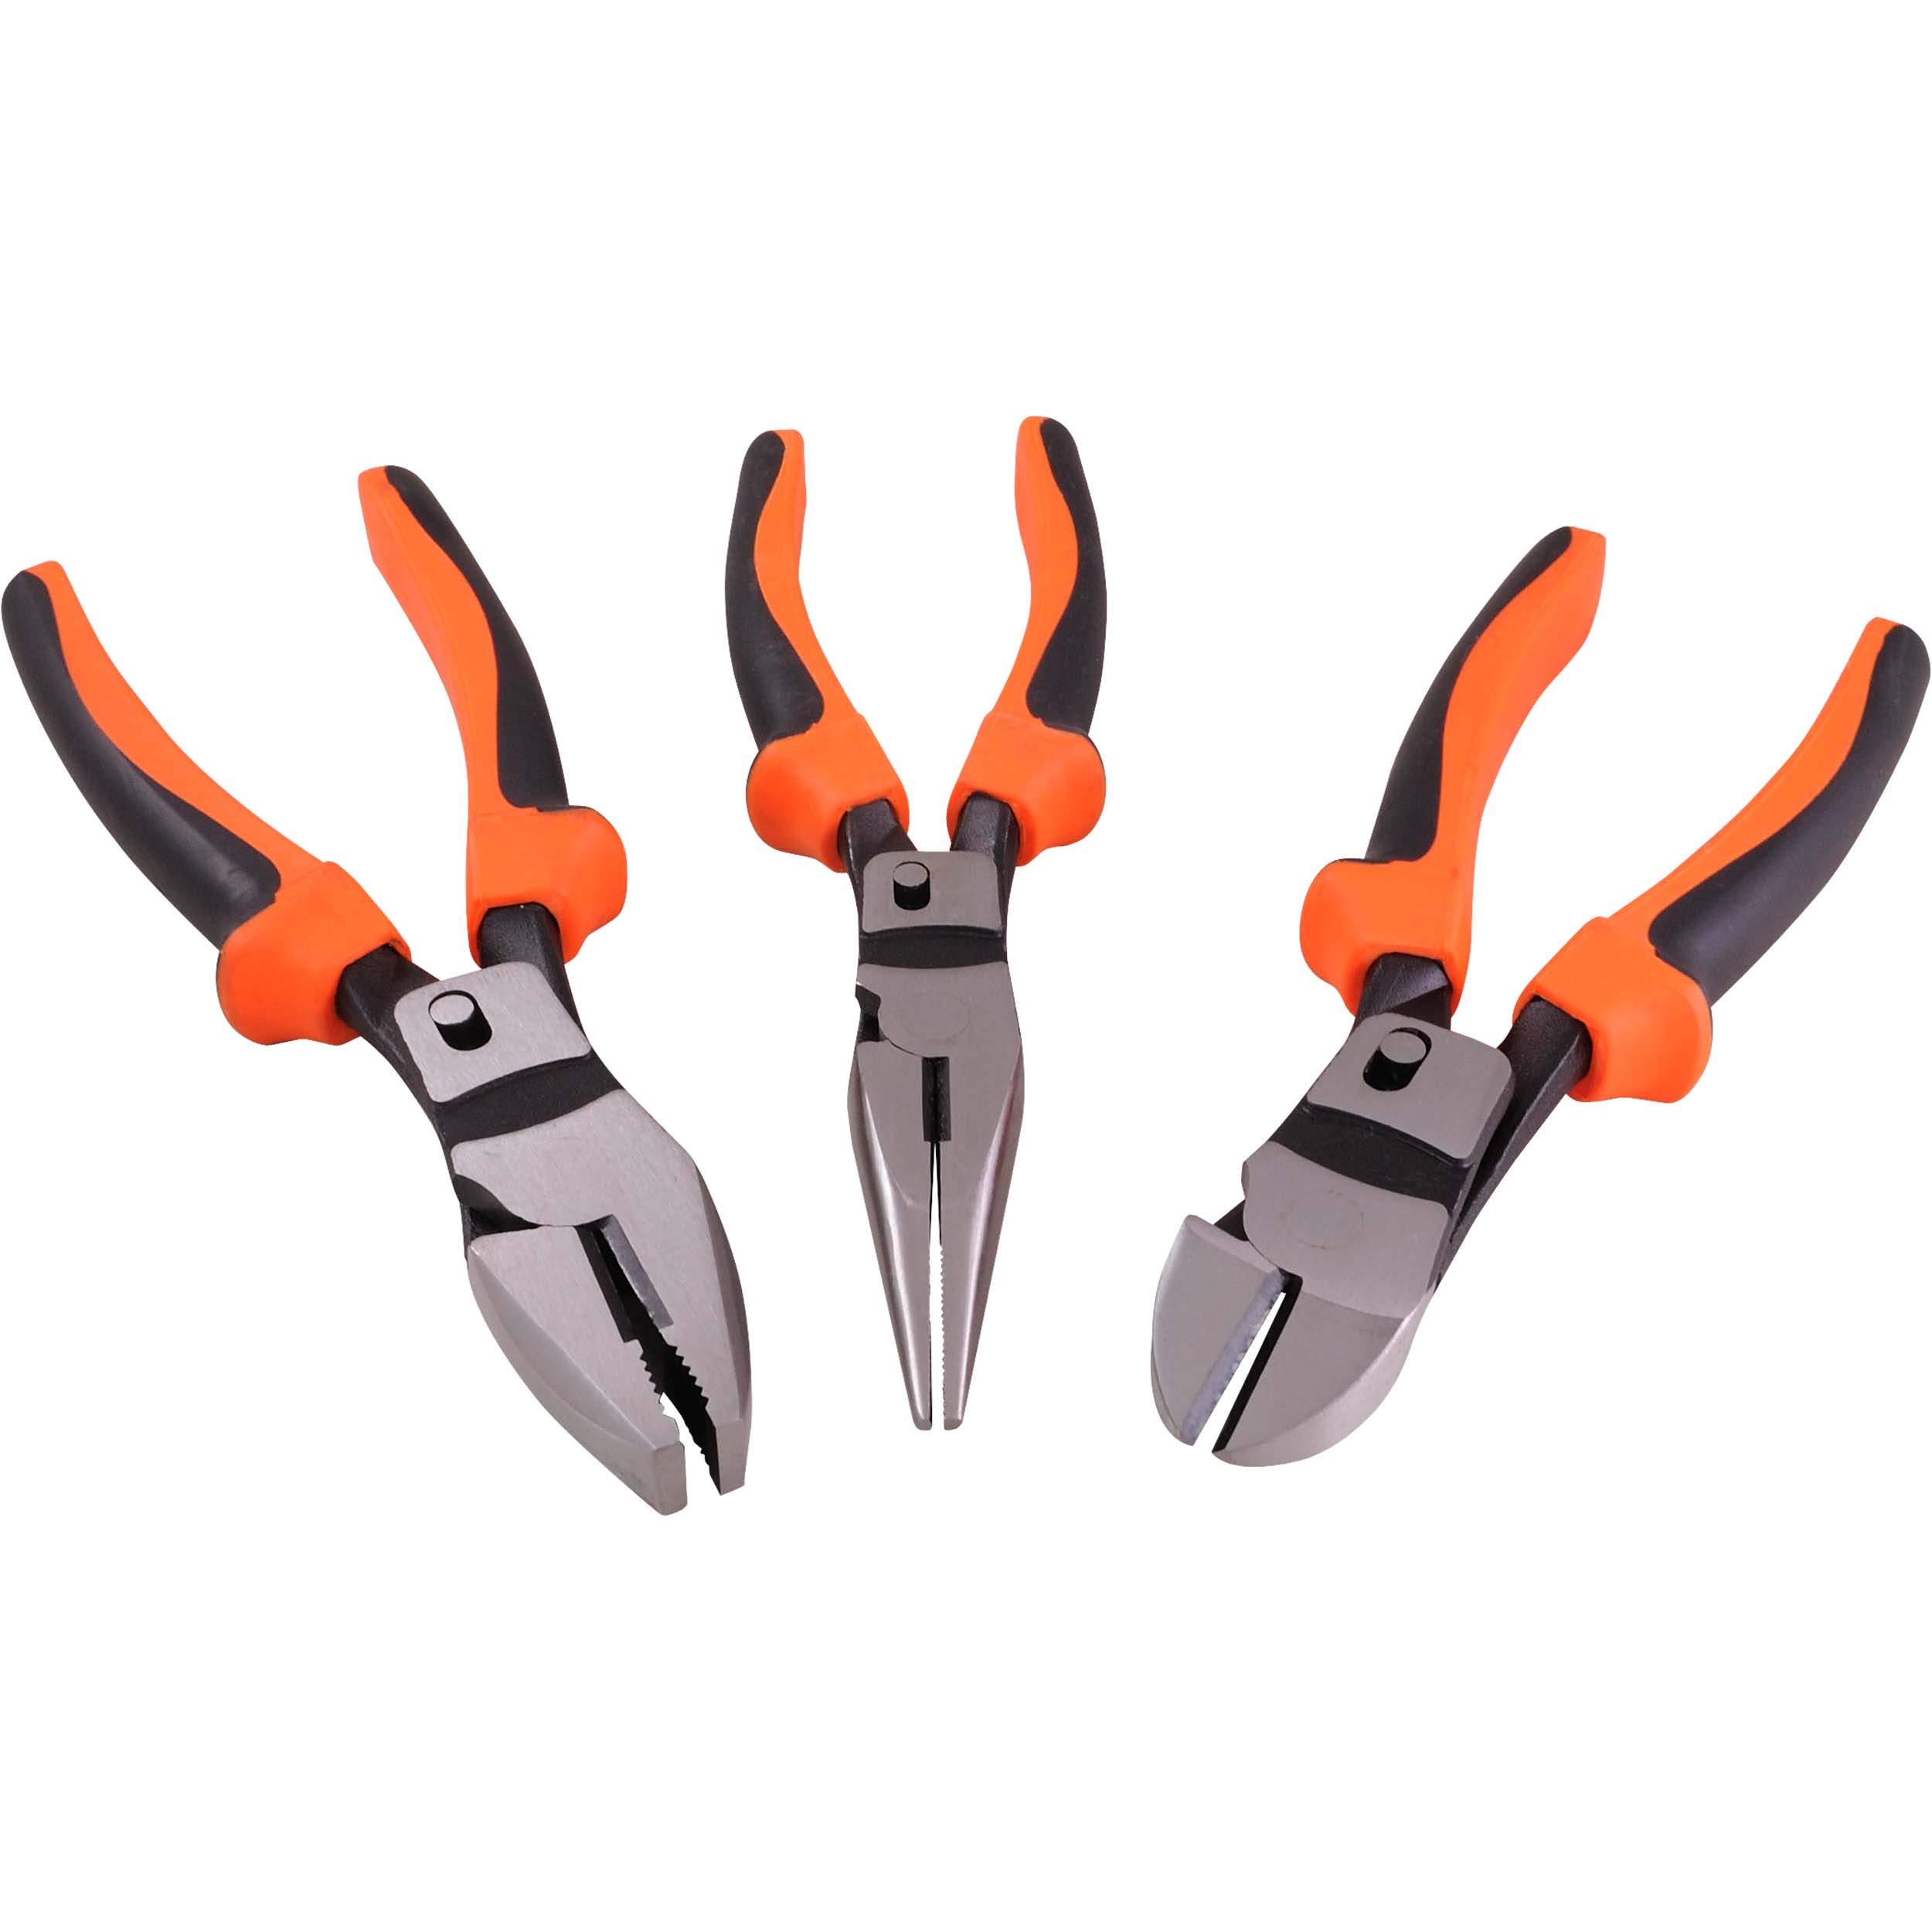 Tools 3pc High Leverage Pliers Set